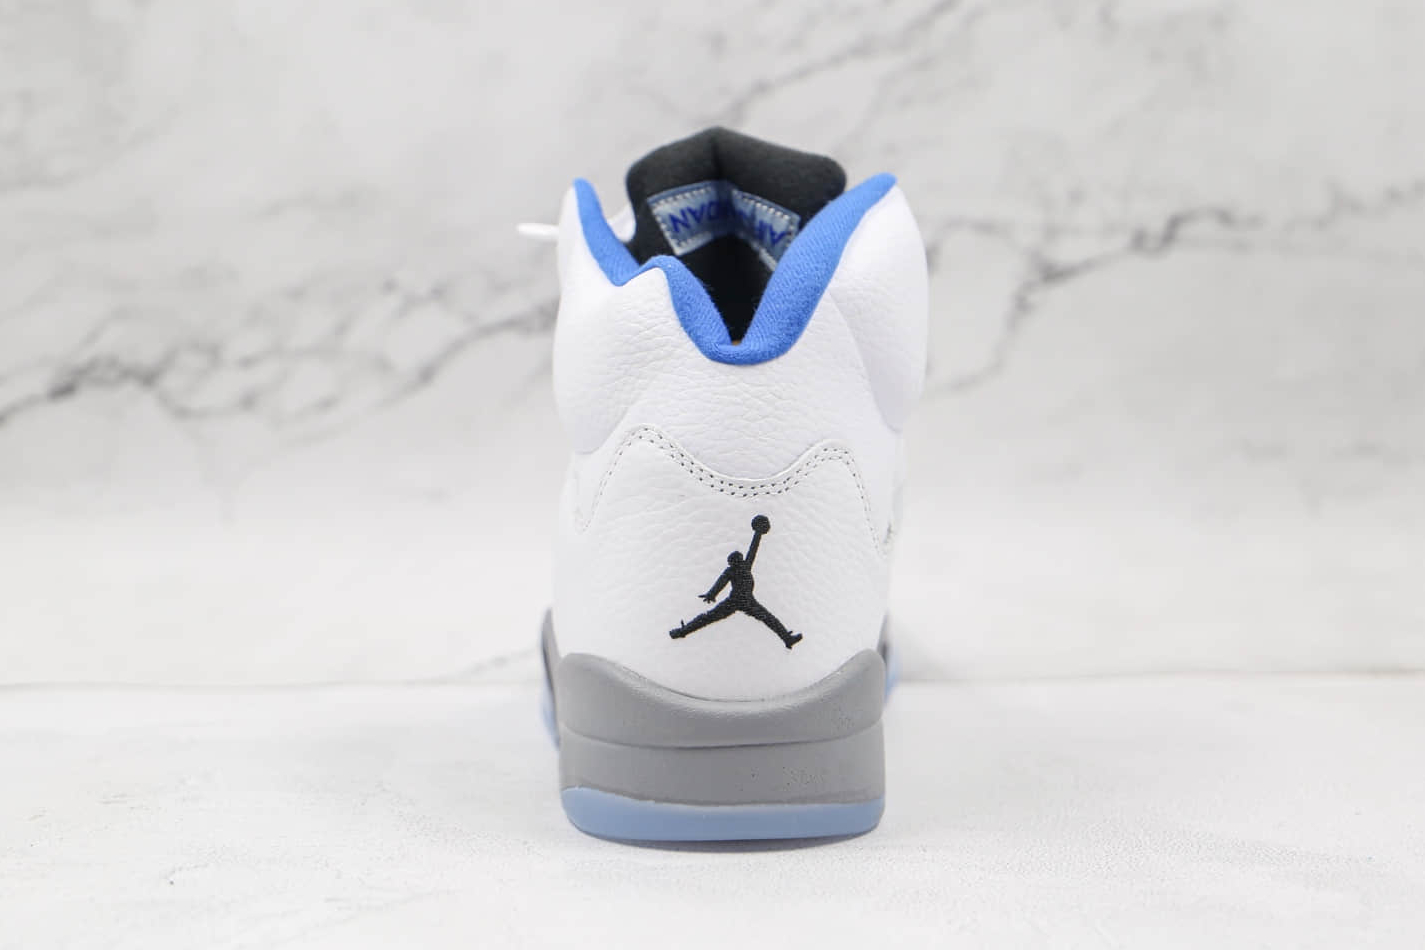 Air Jordan 5 Hyper Royal White Blue Grey Shoes DC0587-140 | Stylish and Iconic Sneakers